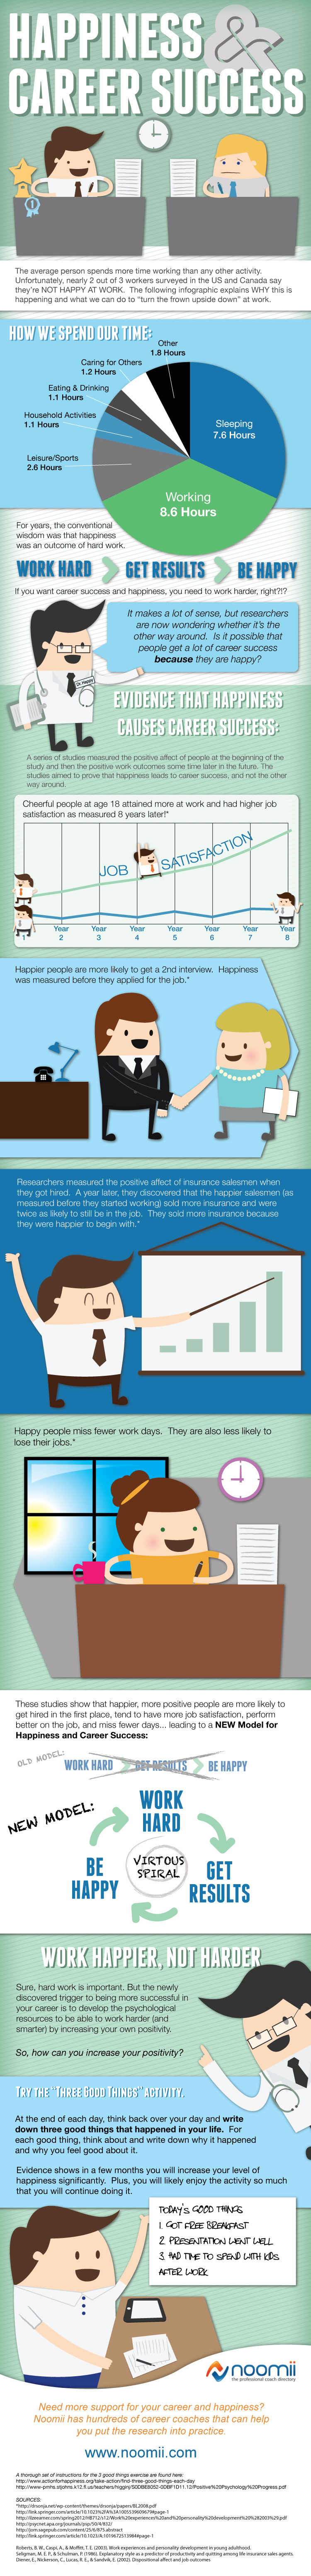 Happiness & Career Success Infographic